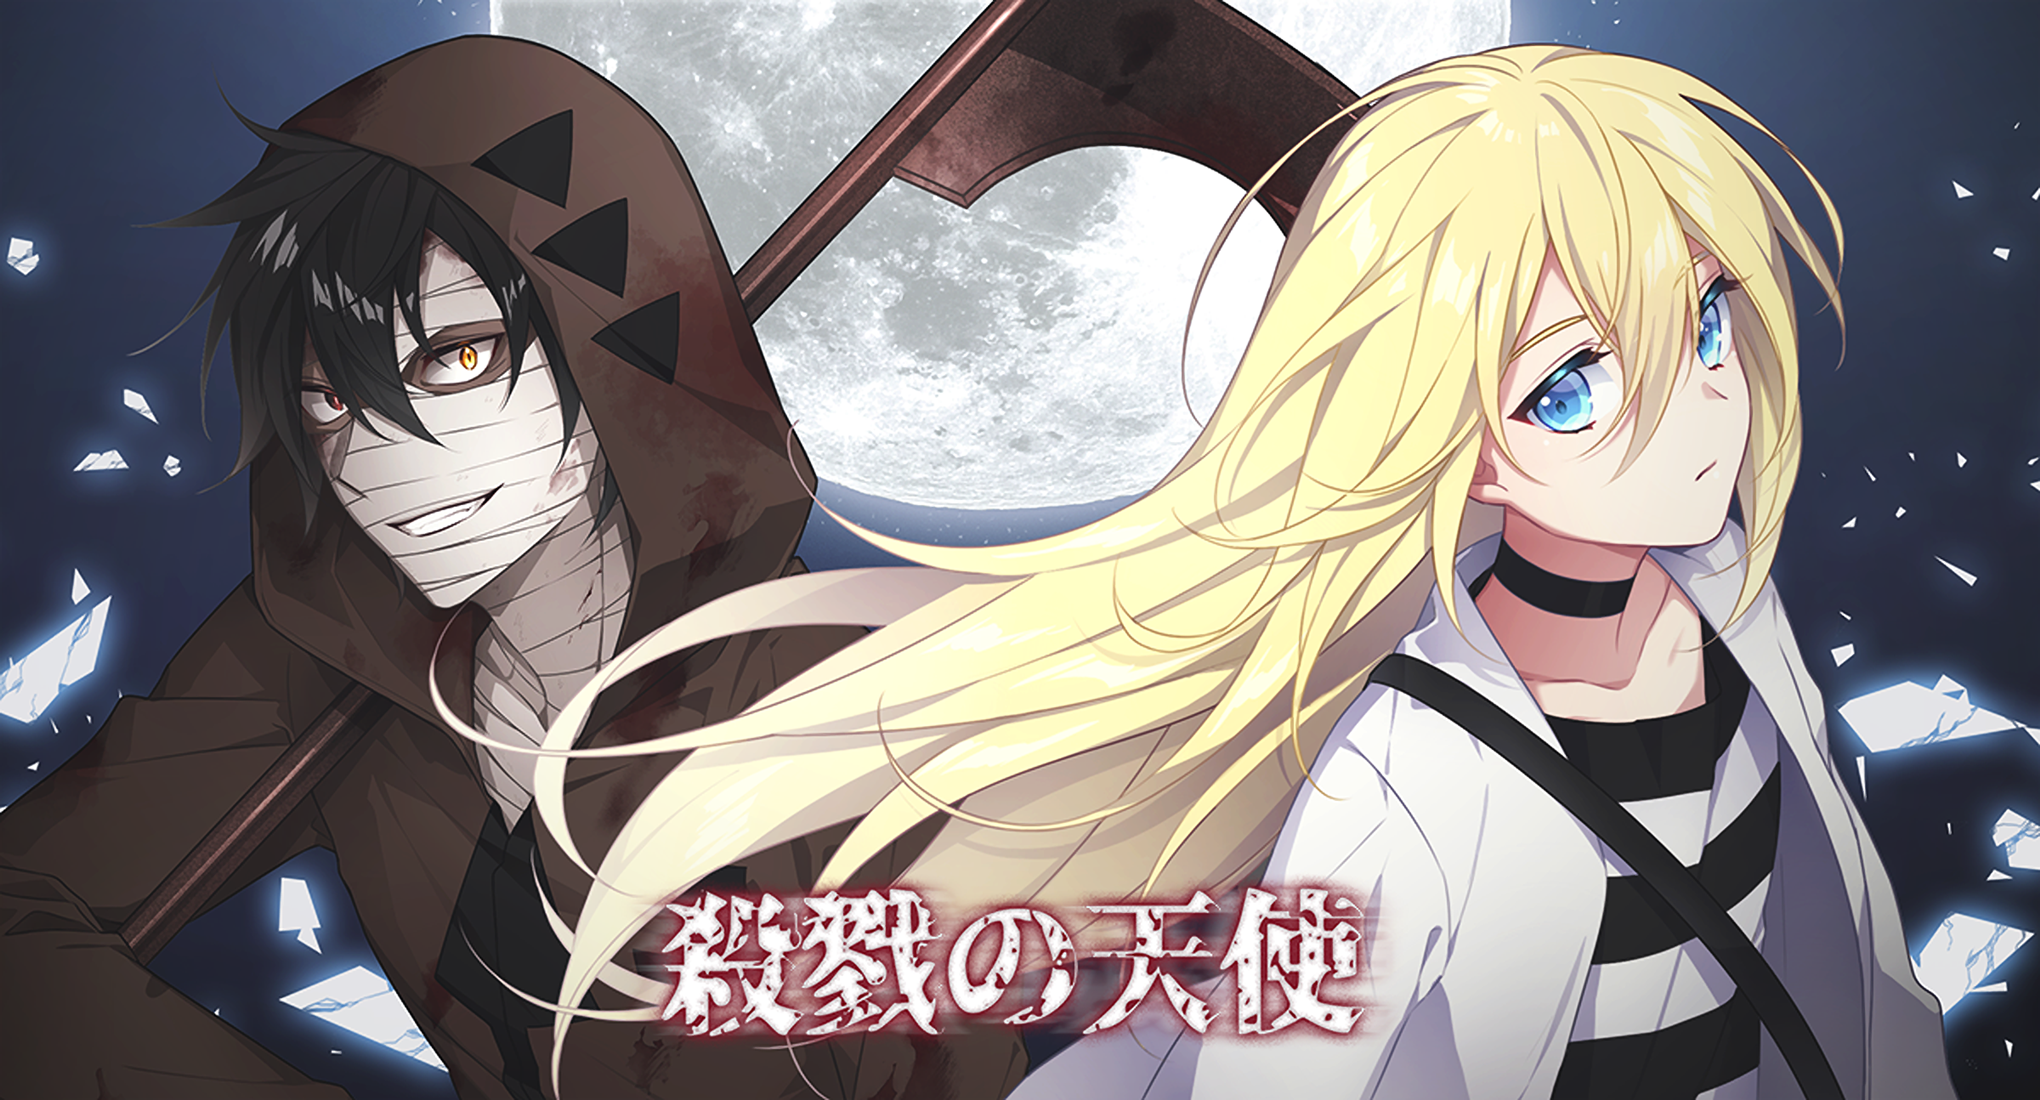 Anime Angels Of Death HD Wallpaper | Background Image